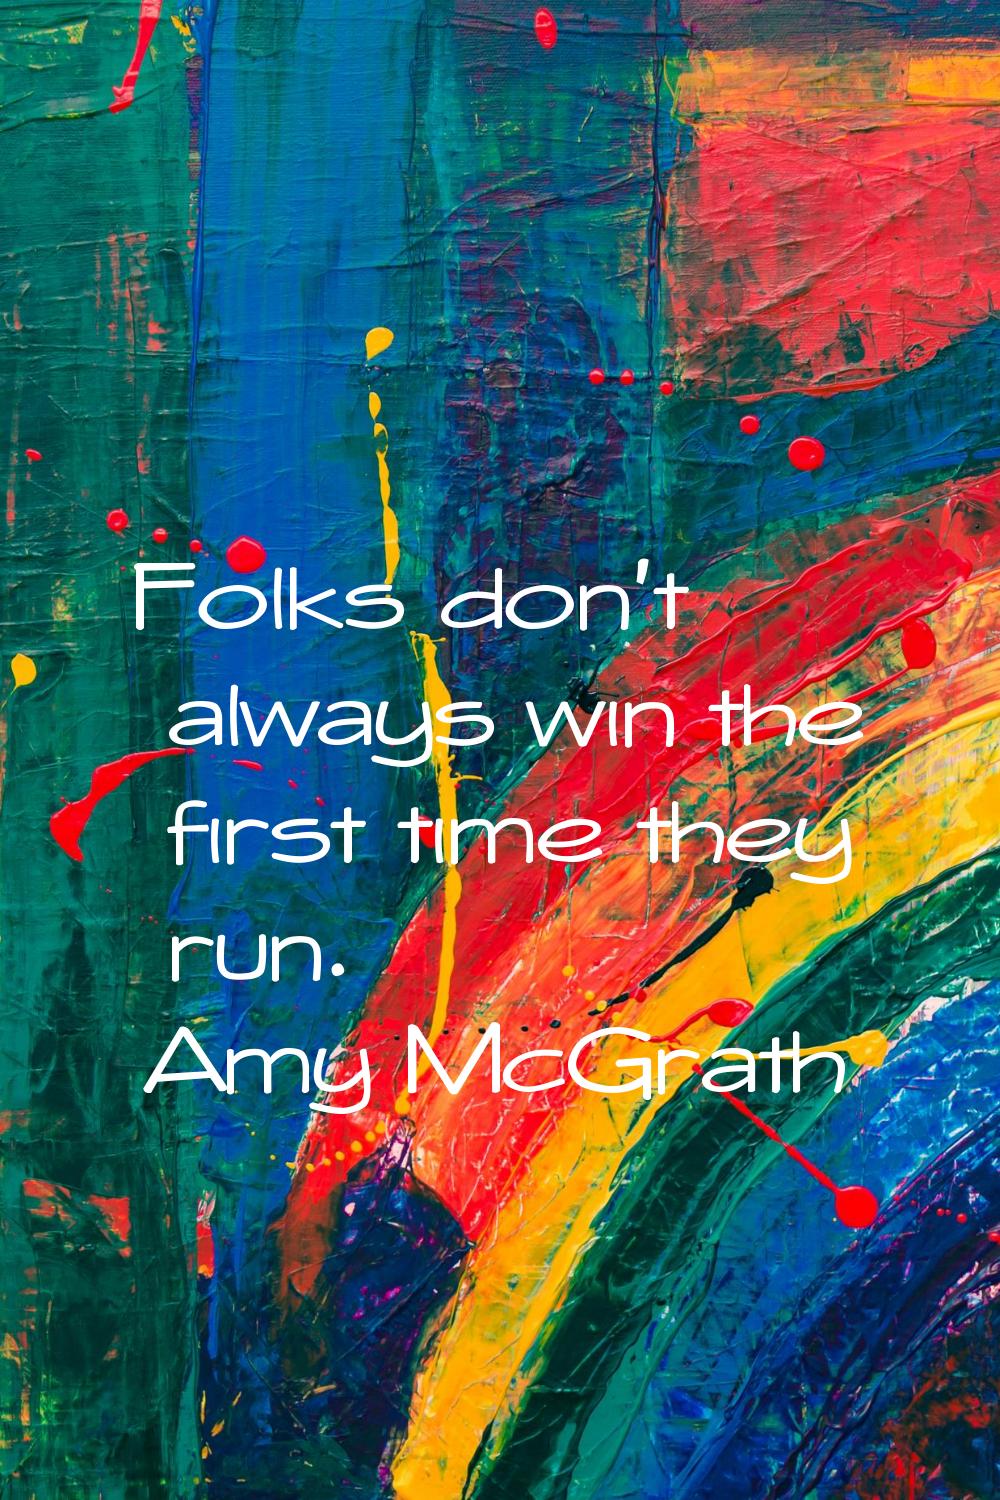 Folks don't always win the first time they run.